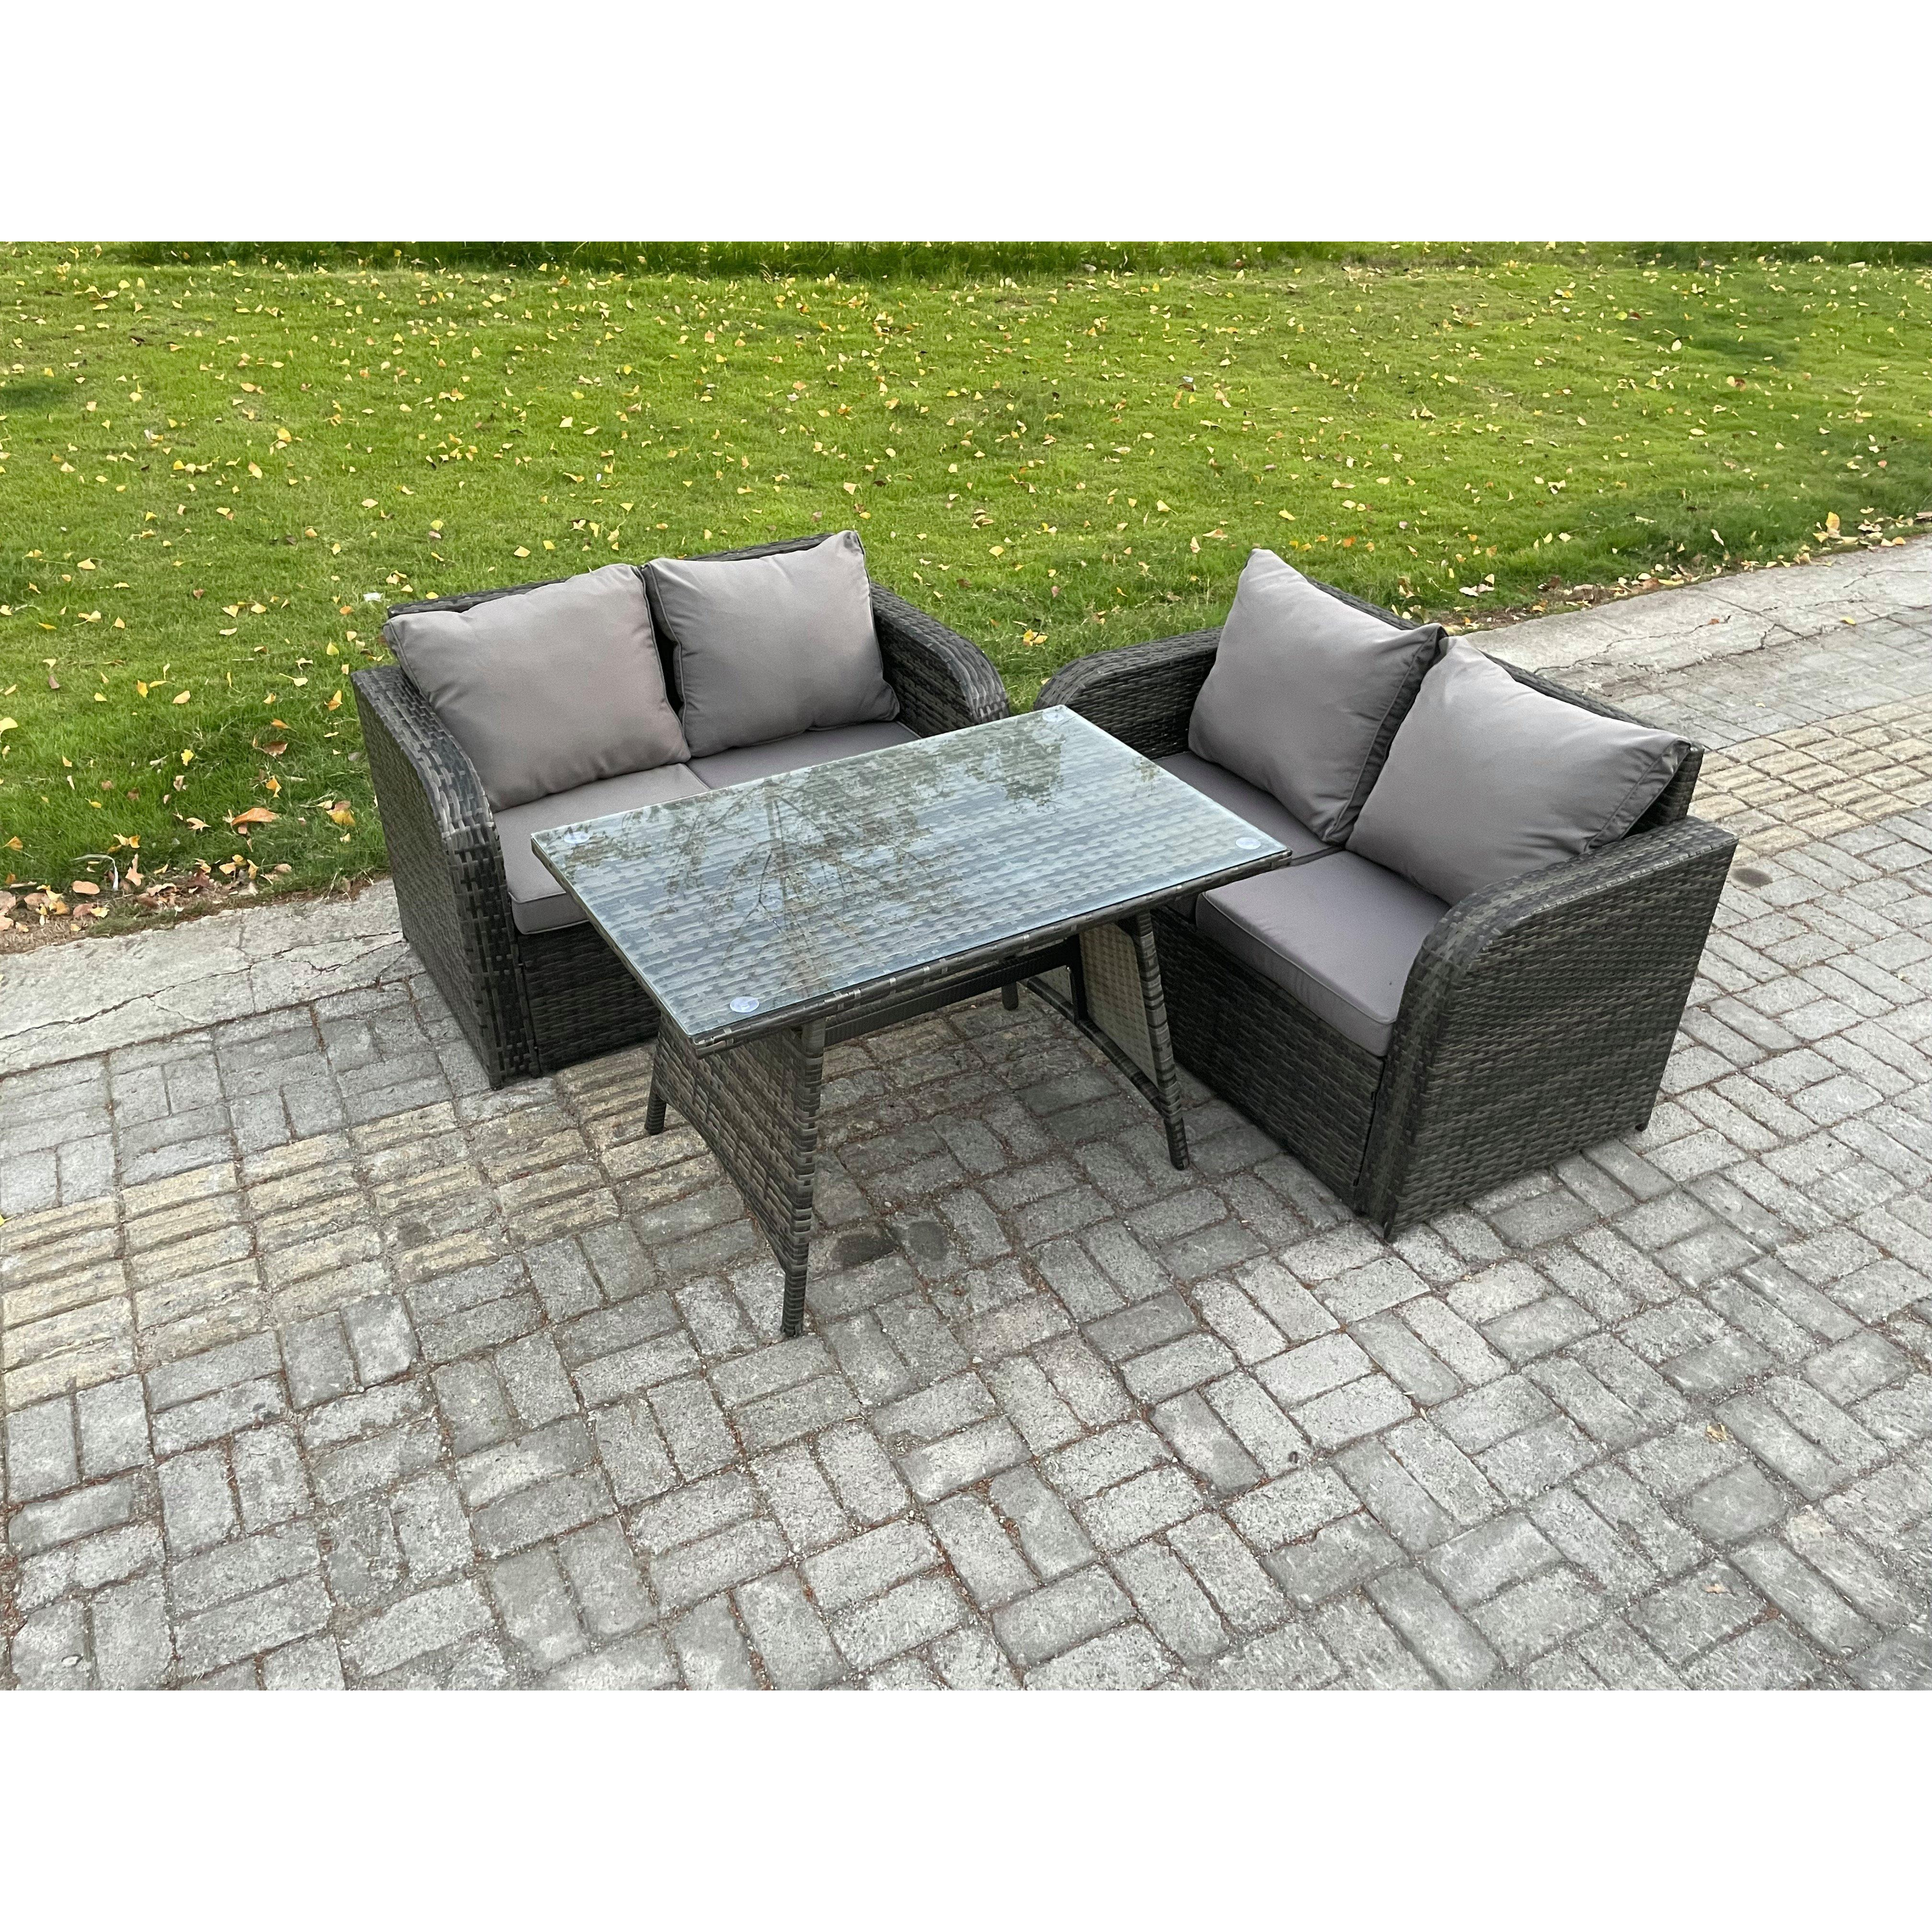 Outdoor Garden Furniture Sets 3 Pieces Wicker Rattan Furniture Sofa Sets with Rectangular Dining Table Love Sofa - image 1